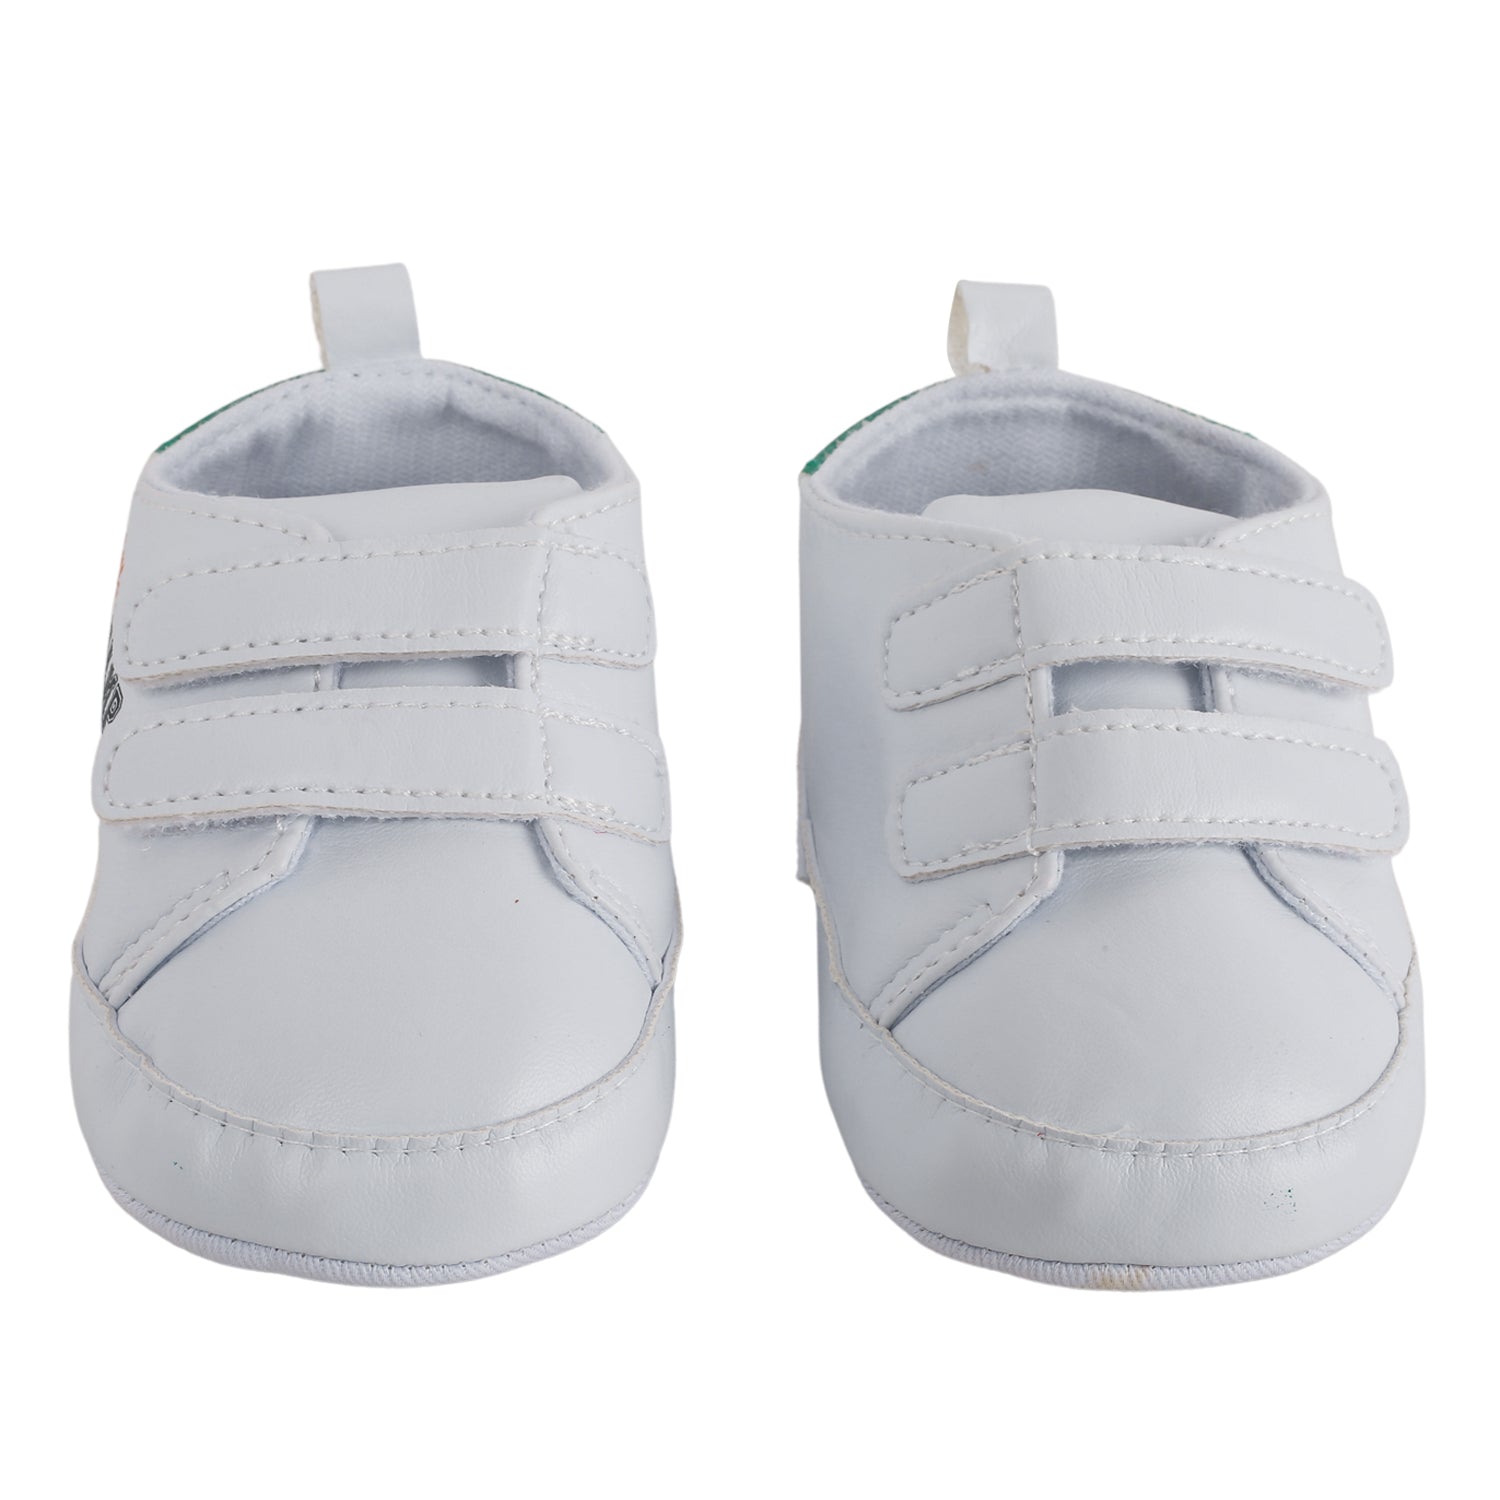 Baby Moo Little Champ White Velcro Sneakers